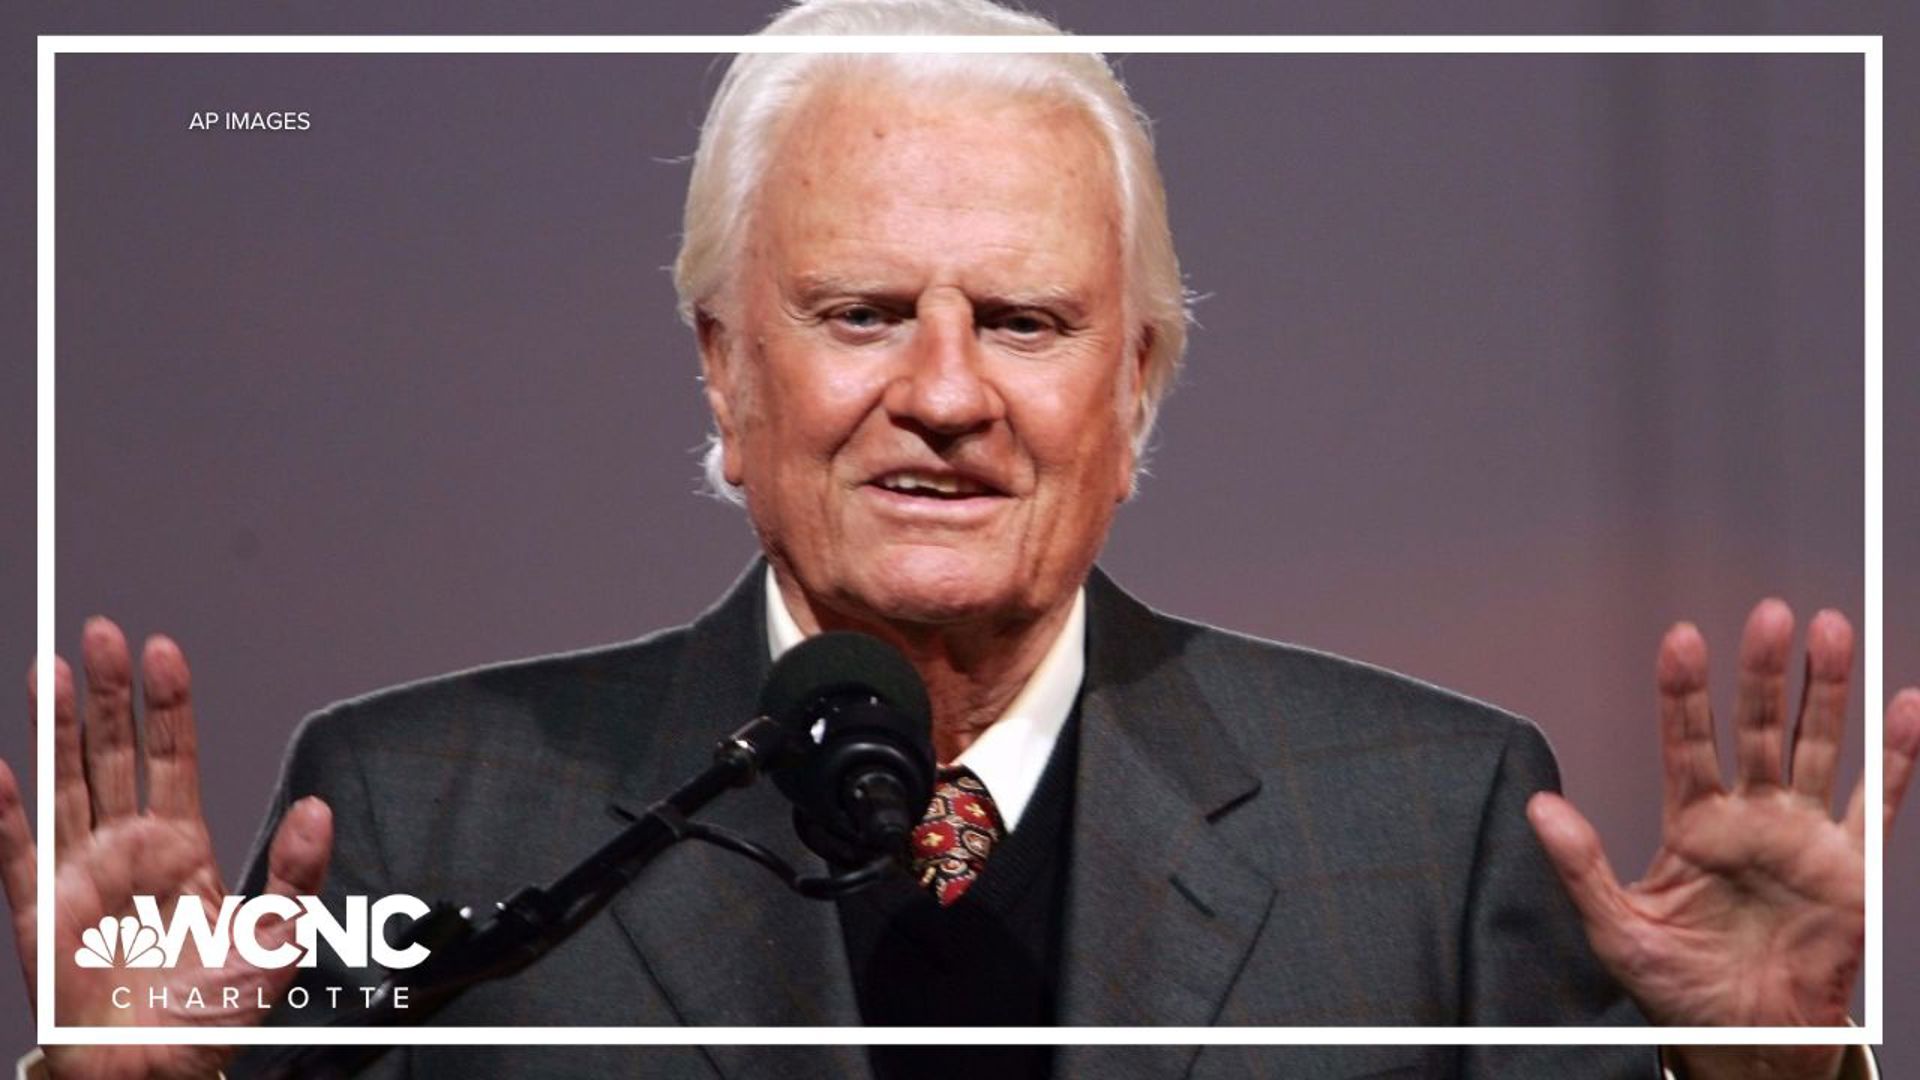 The late Rev. Billy Graham will be honored with a statue at the U.S. Capitol on May 16. Graham died at 99 years old in 2018.